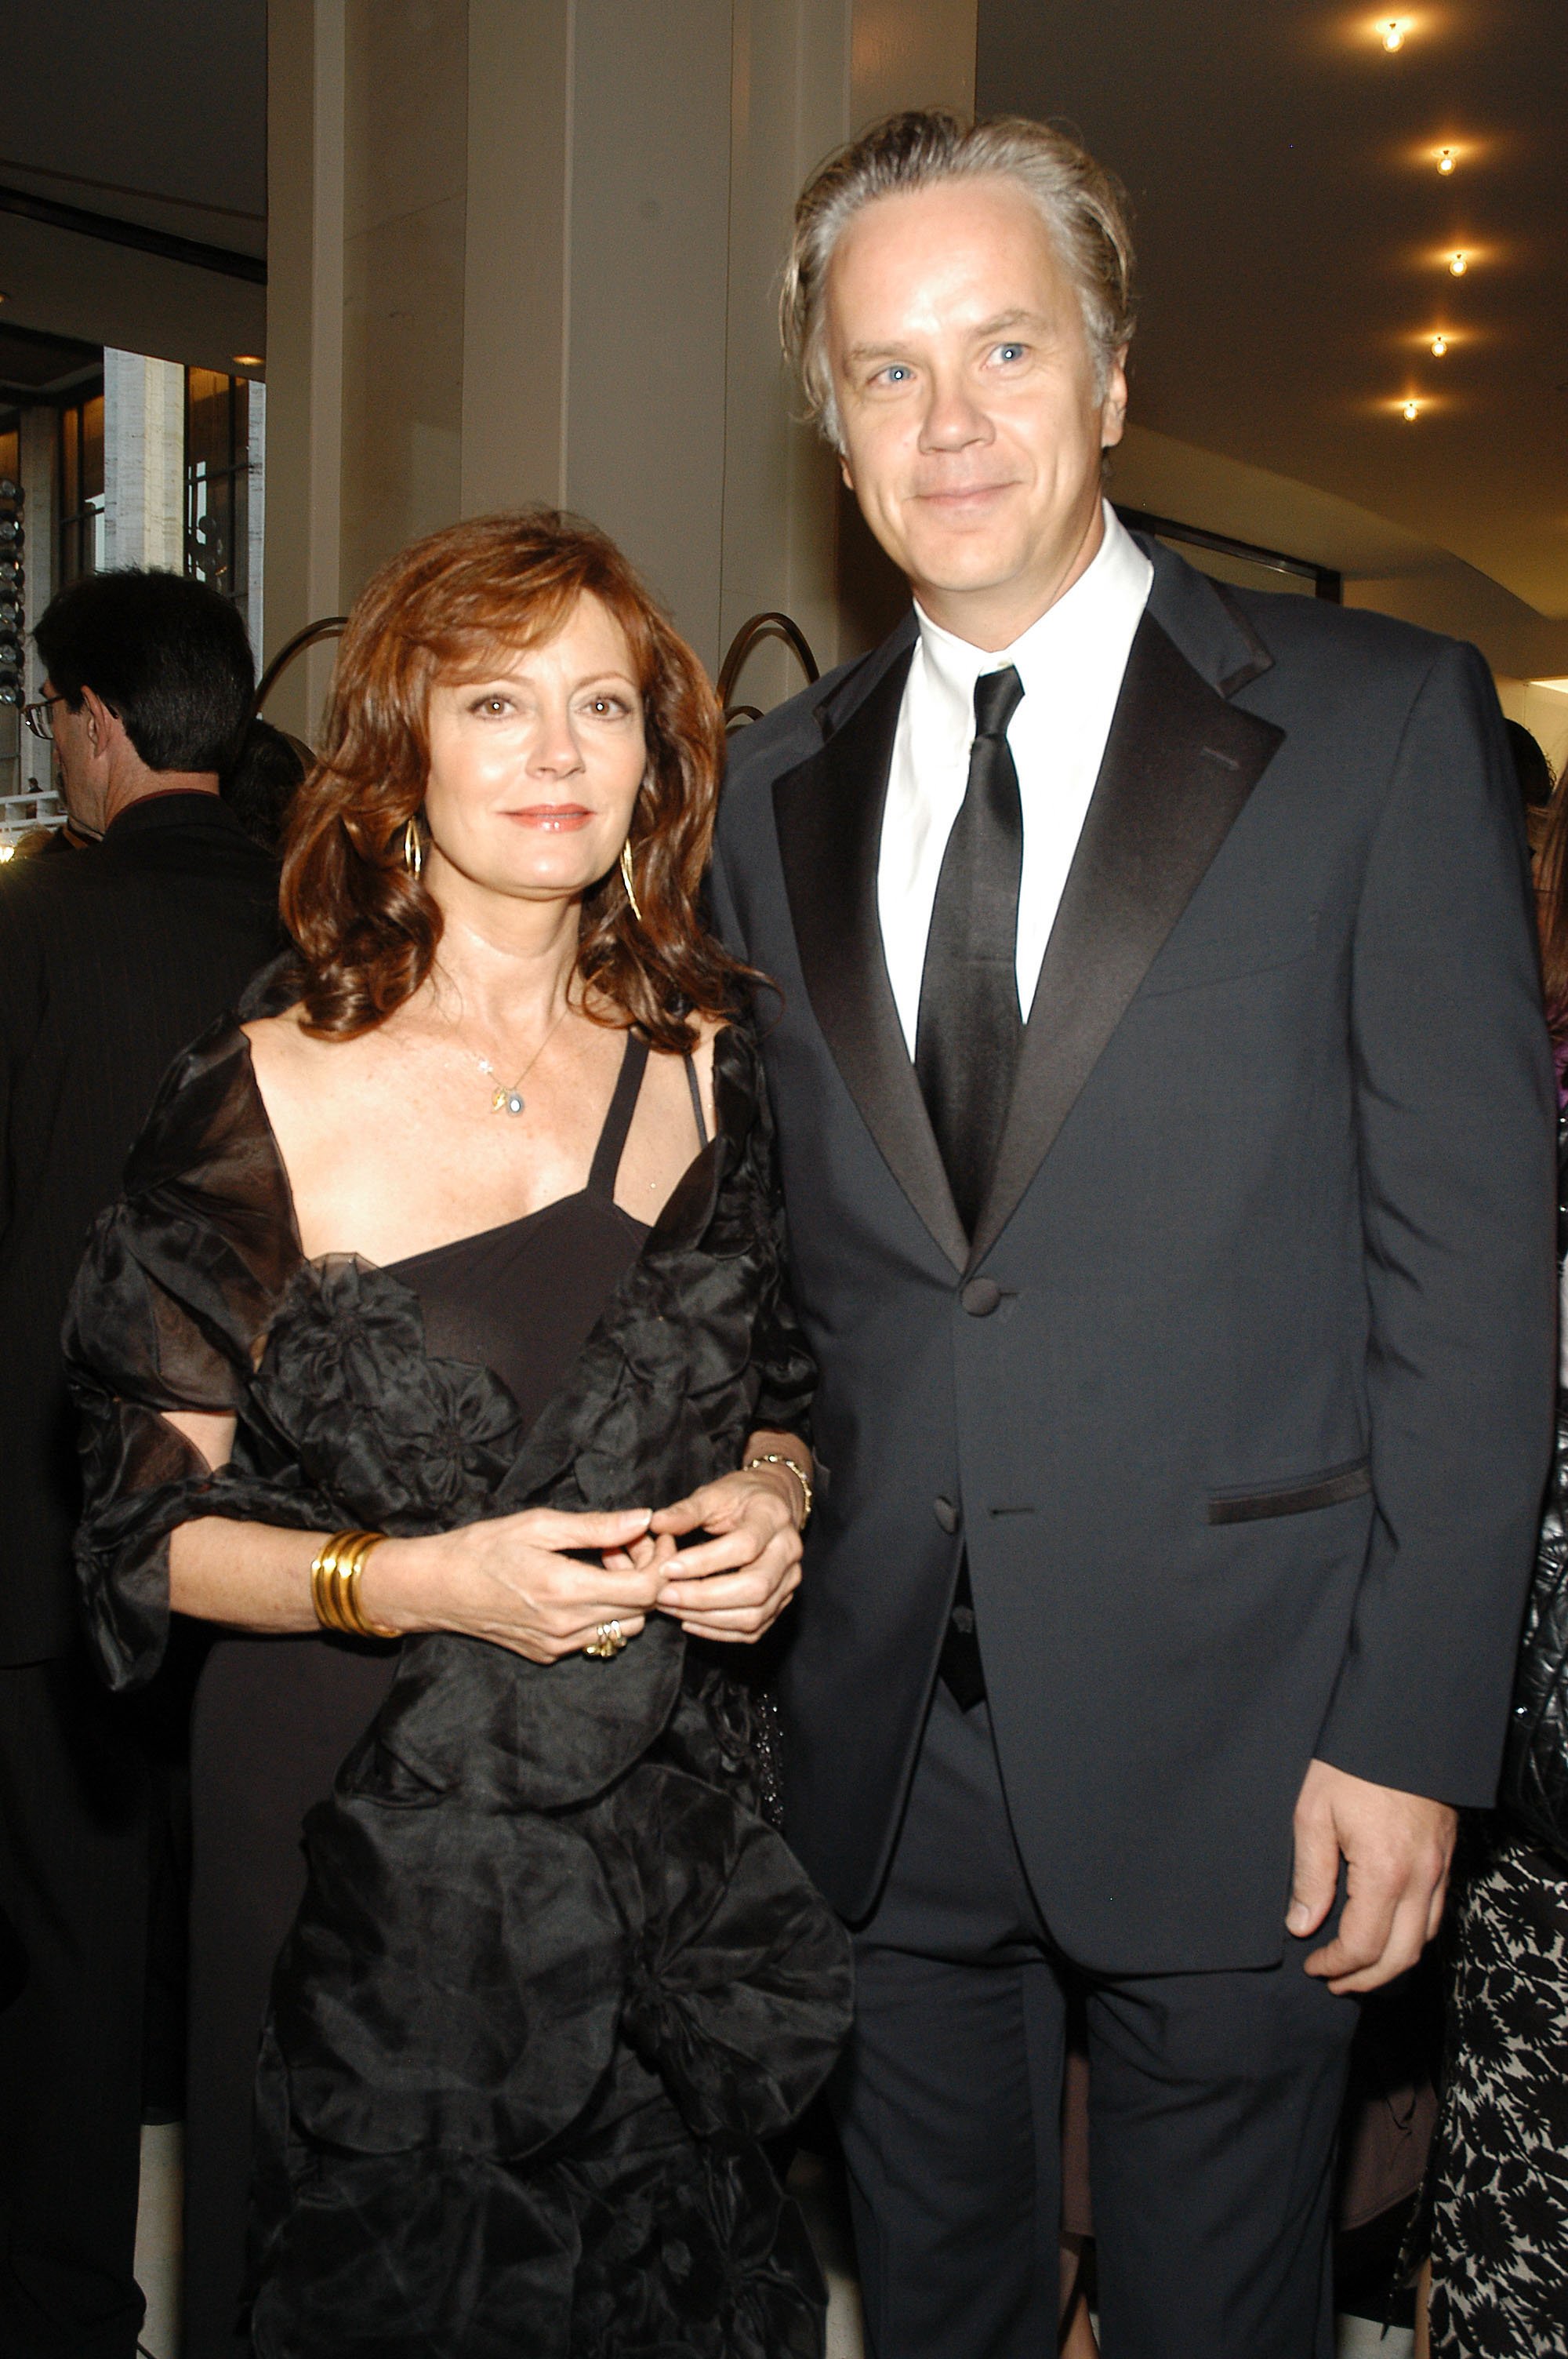 Susan Sarandon and Tim Robbins in New York 2003. | Source: Getty Images